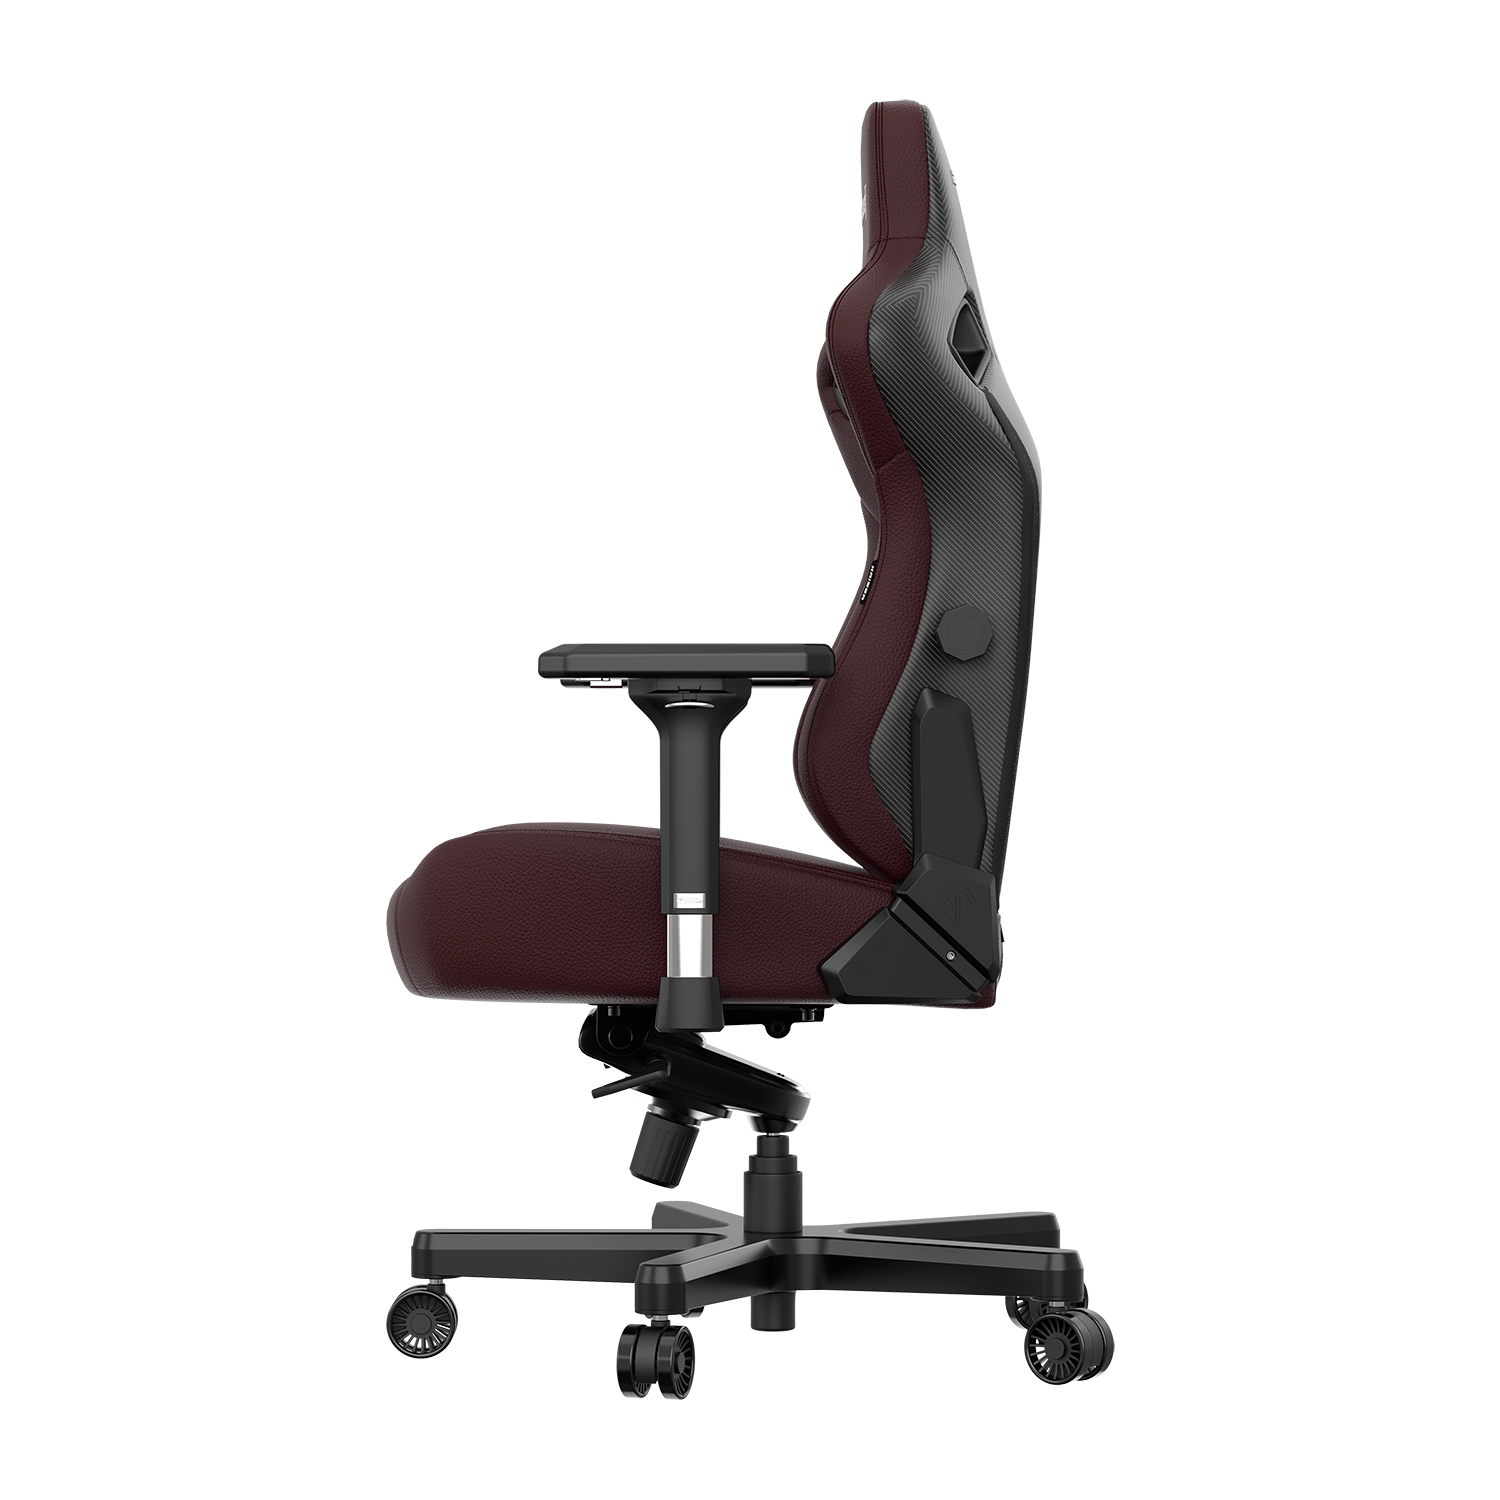 ANDASEAT KAISER 3 L SIZE DURAXTRA LEATHERETTE - CLASSIC MAROON